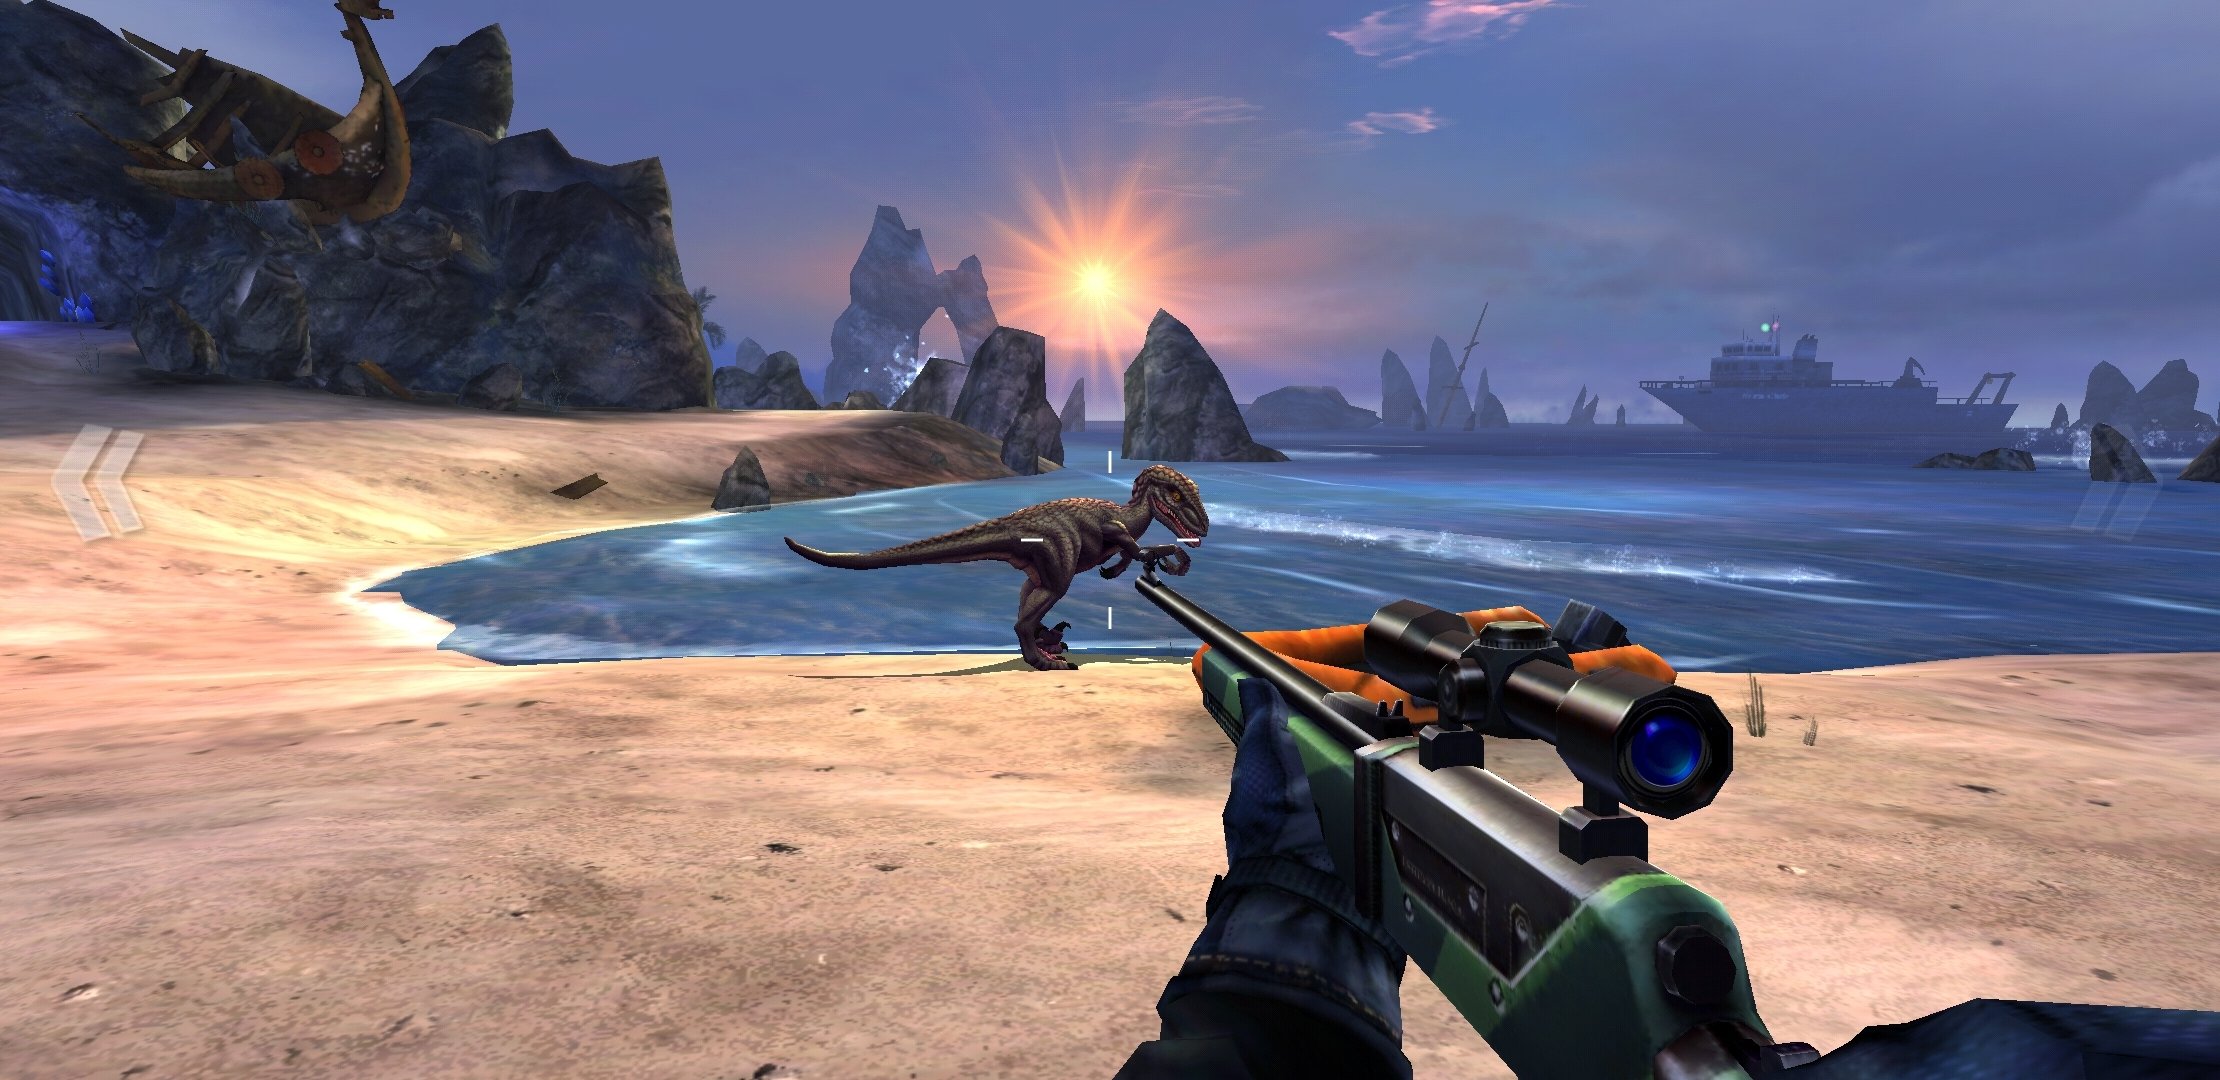 dino hunter deadly shores game free download